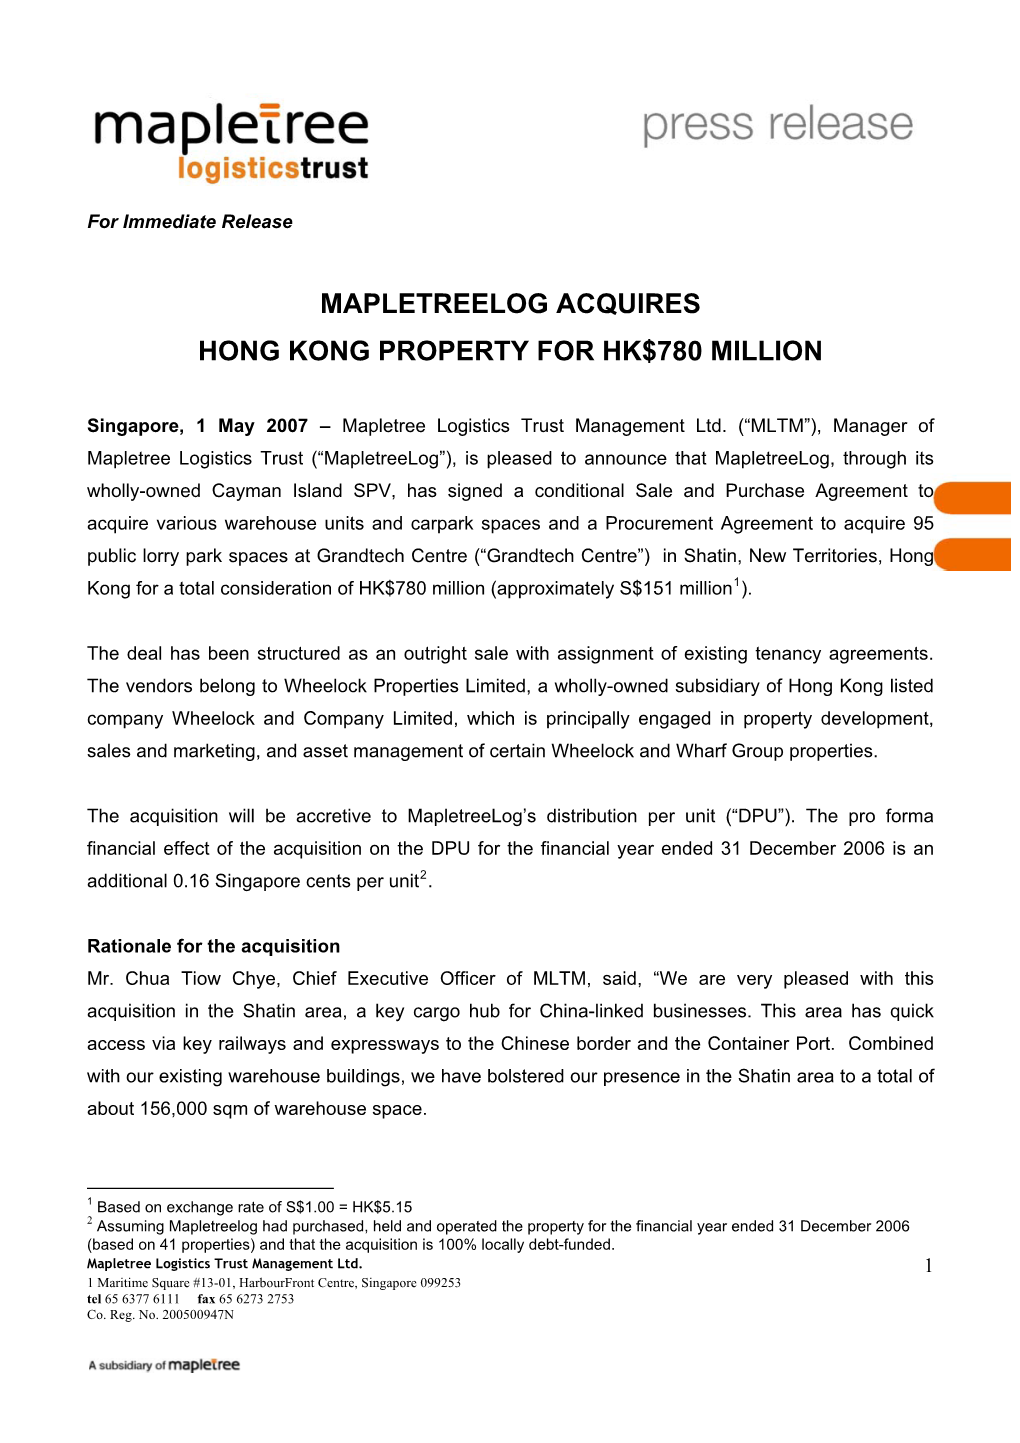 Mapletreelog Acquires Hong Kong Property for Hk$780 Million